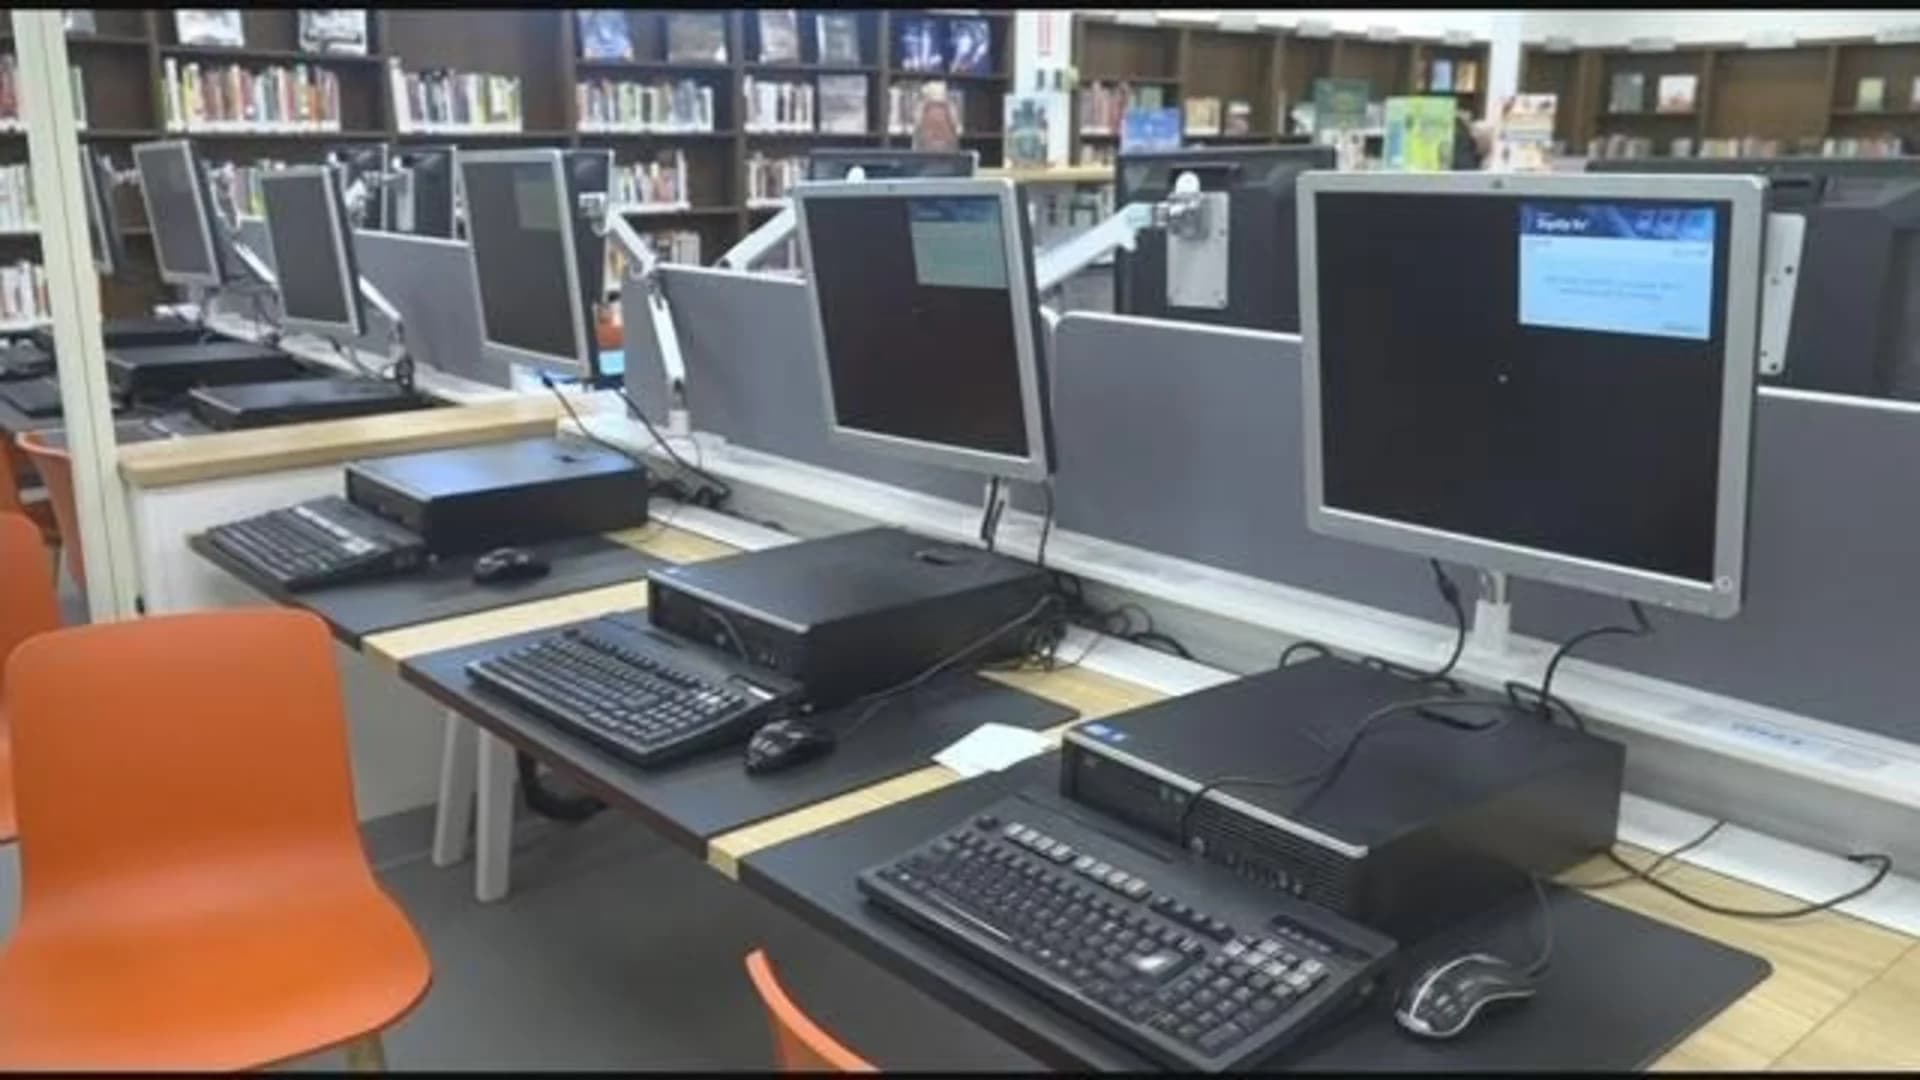 Marcy Library reopens after 18-month renovation